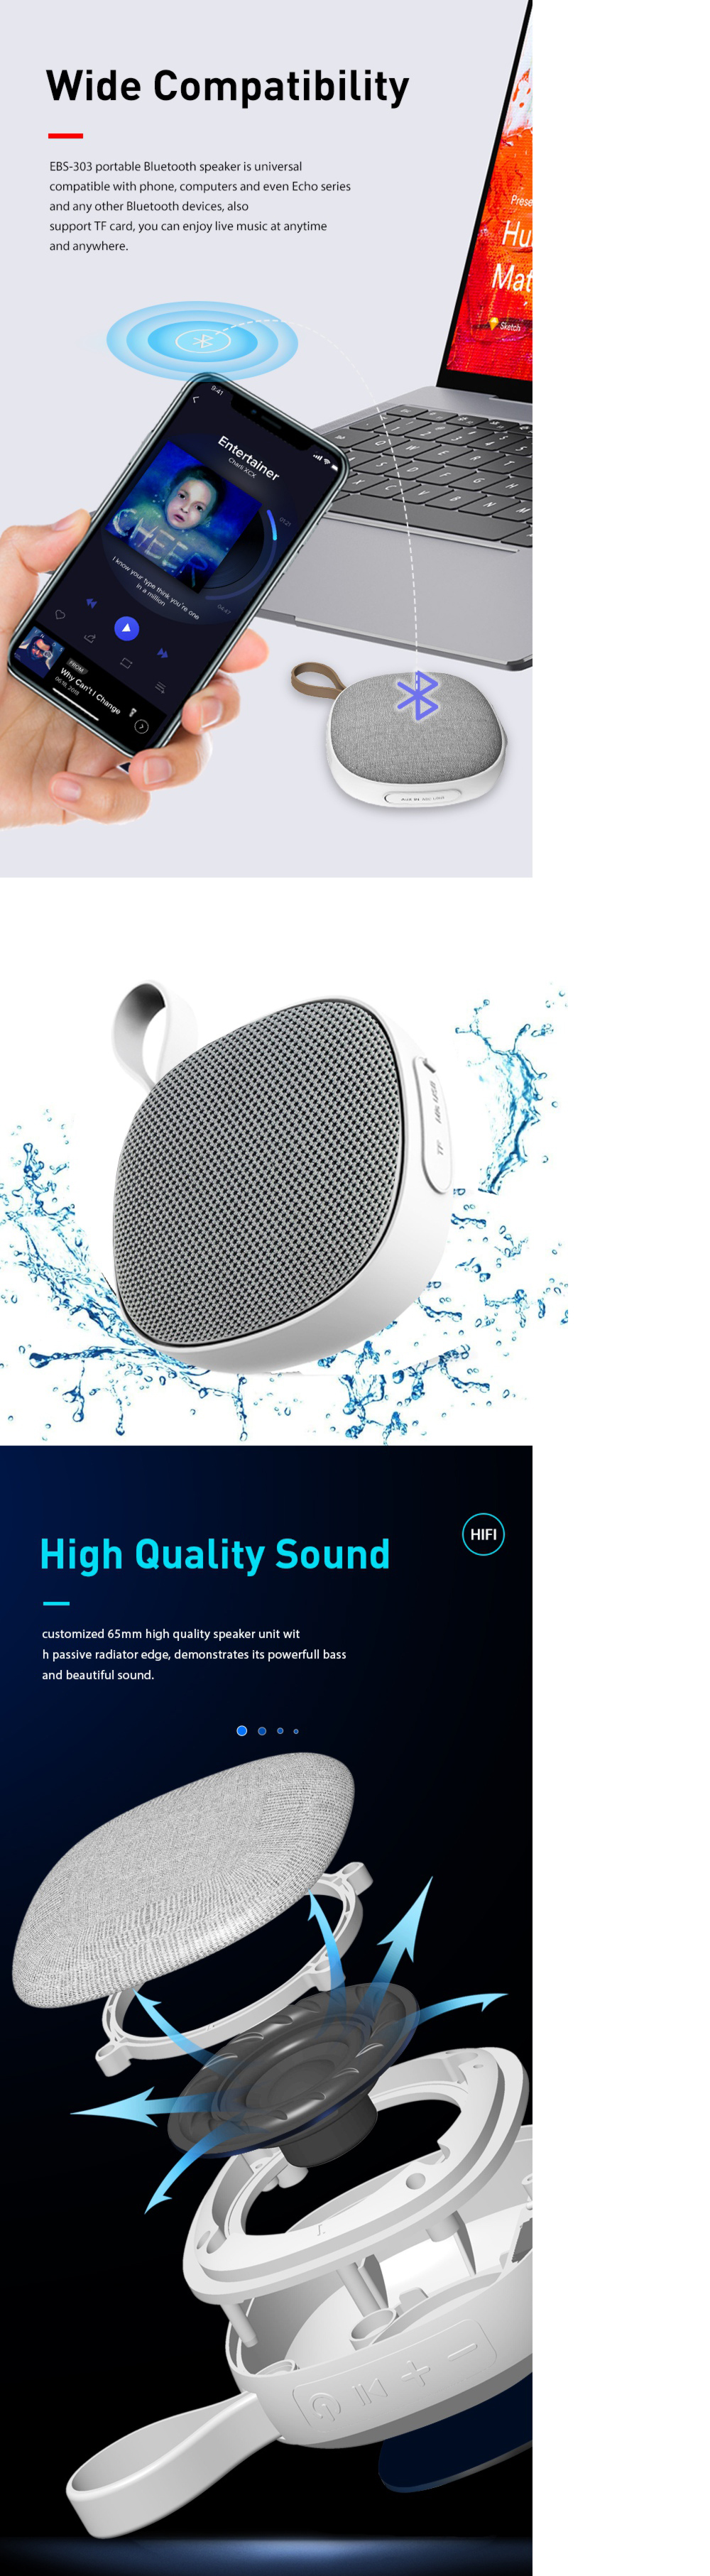 Portable-bluetooth-50-Speaker-IPX6-Waterproof-TWS-Function-Magnetic-Adsorption-Bass-Subwoofer-HIFI-S-1846848-2